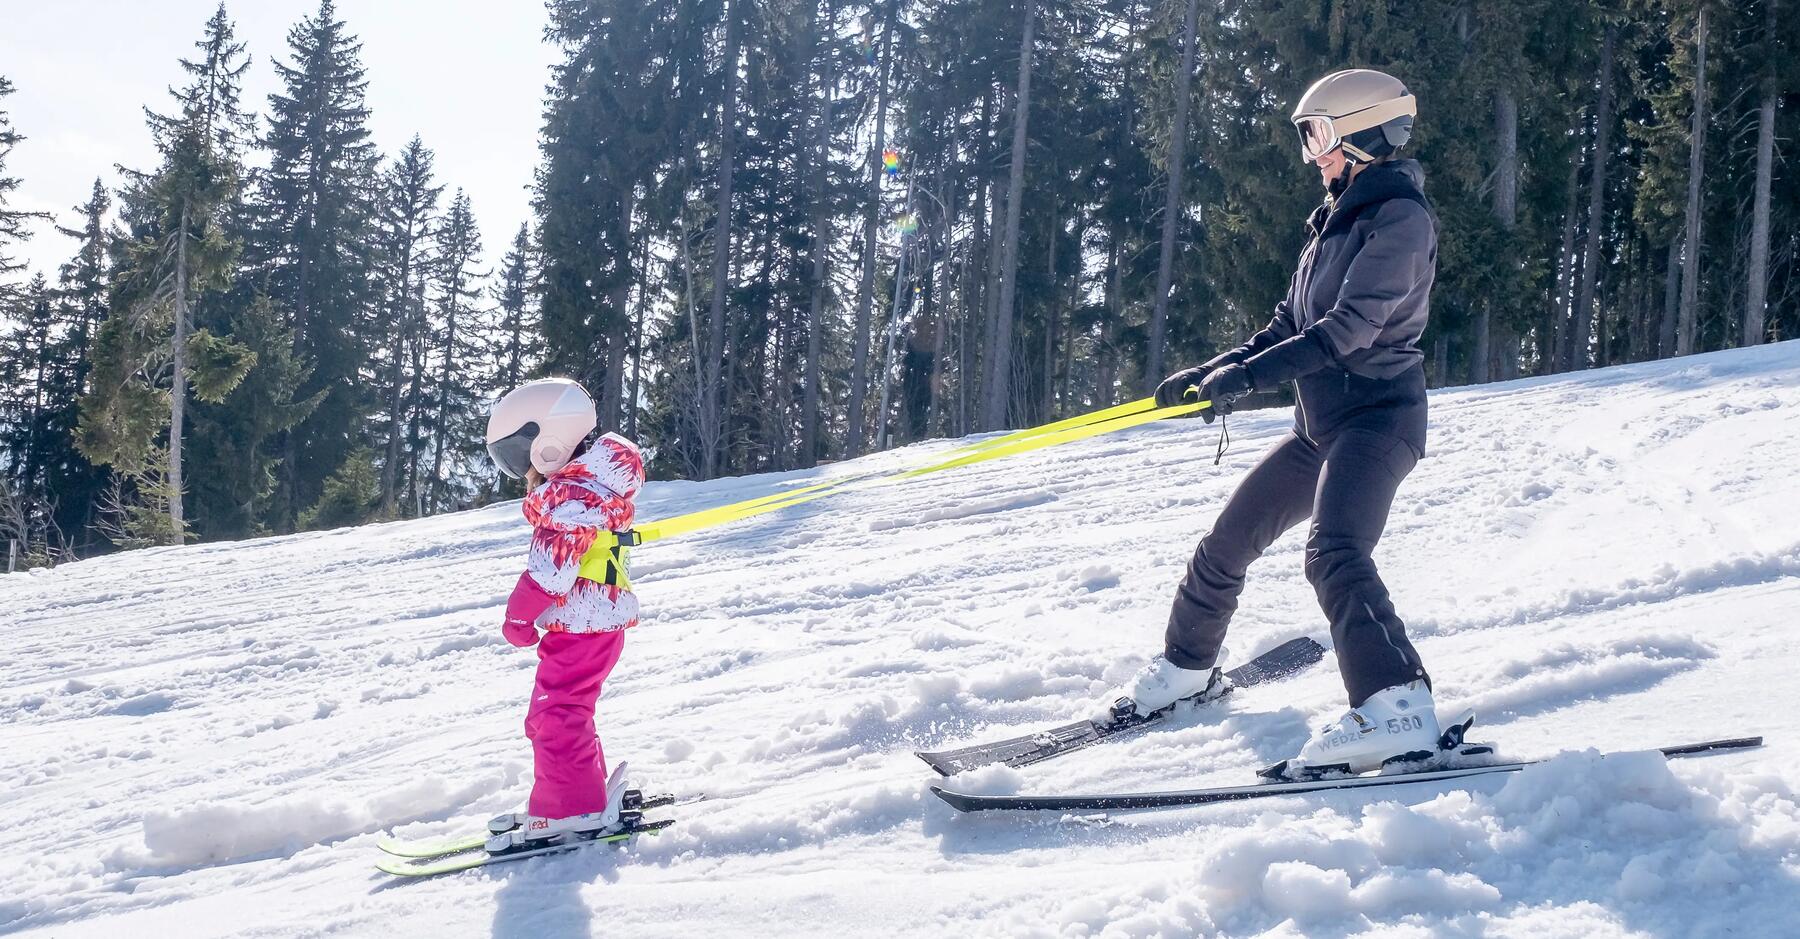 A girl and her daughter going down the slope on the skis and the using a harness help the girl ski